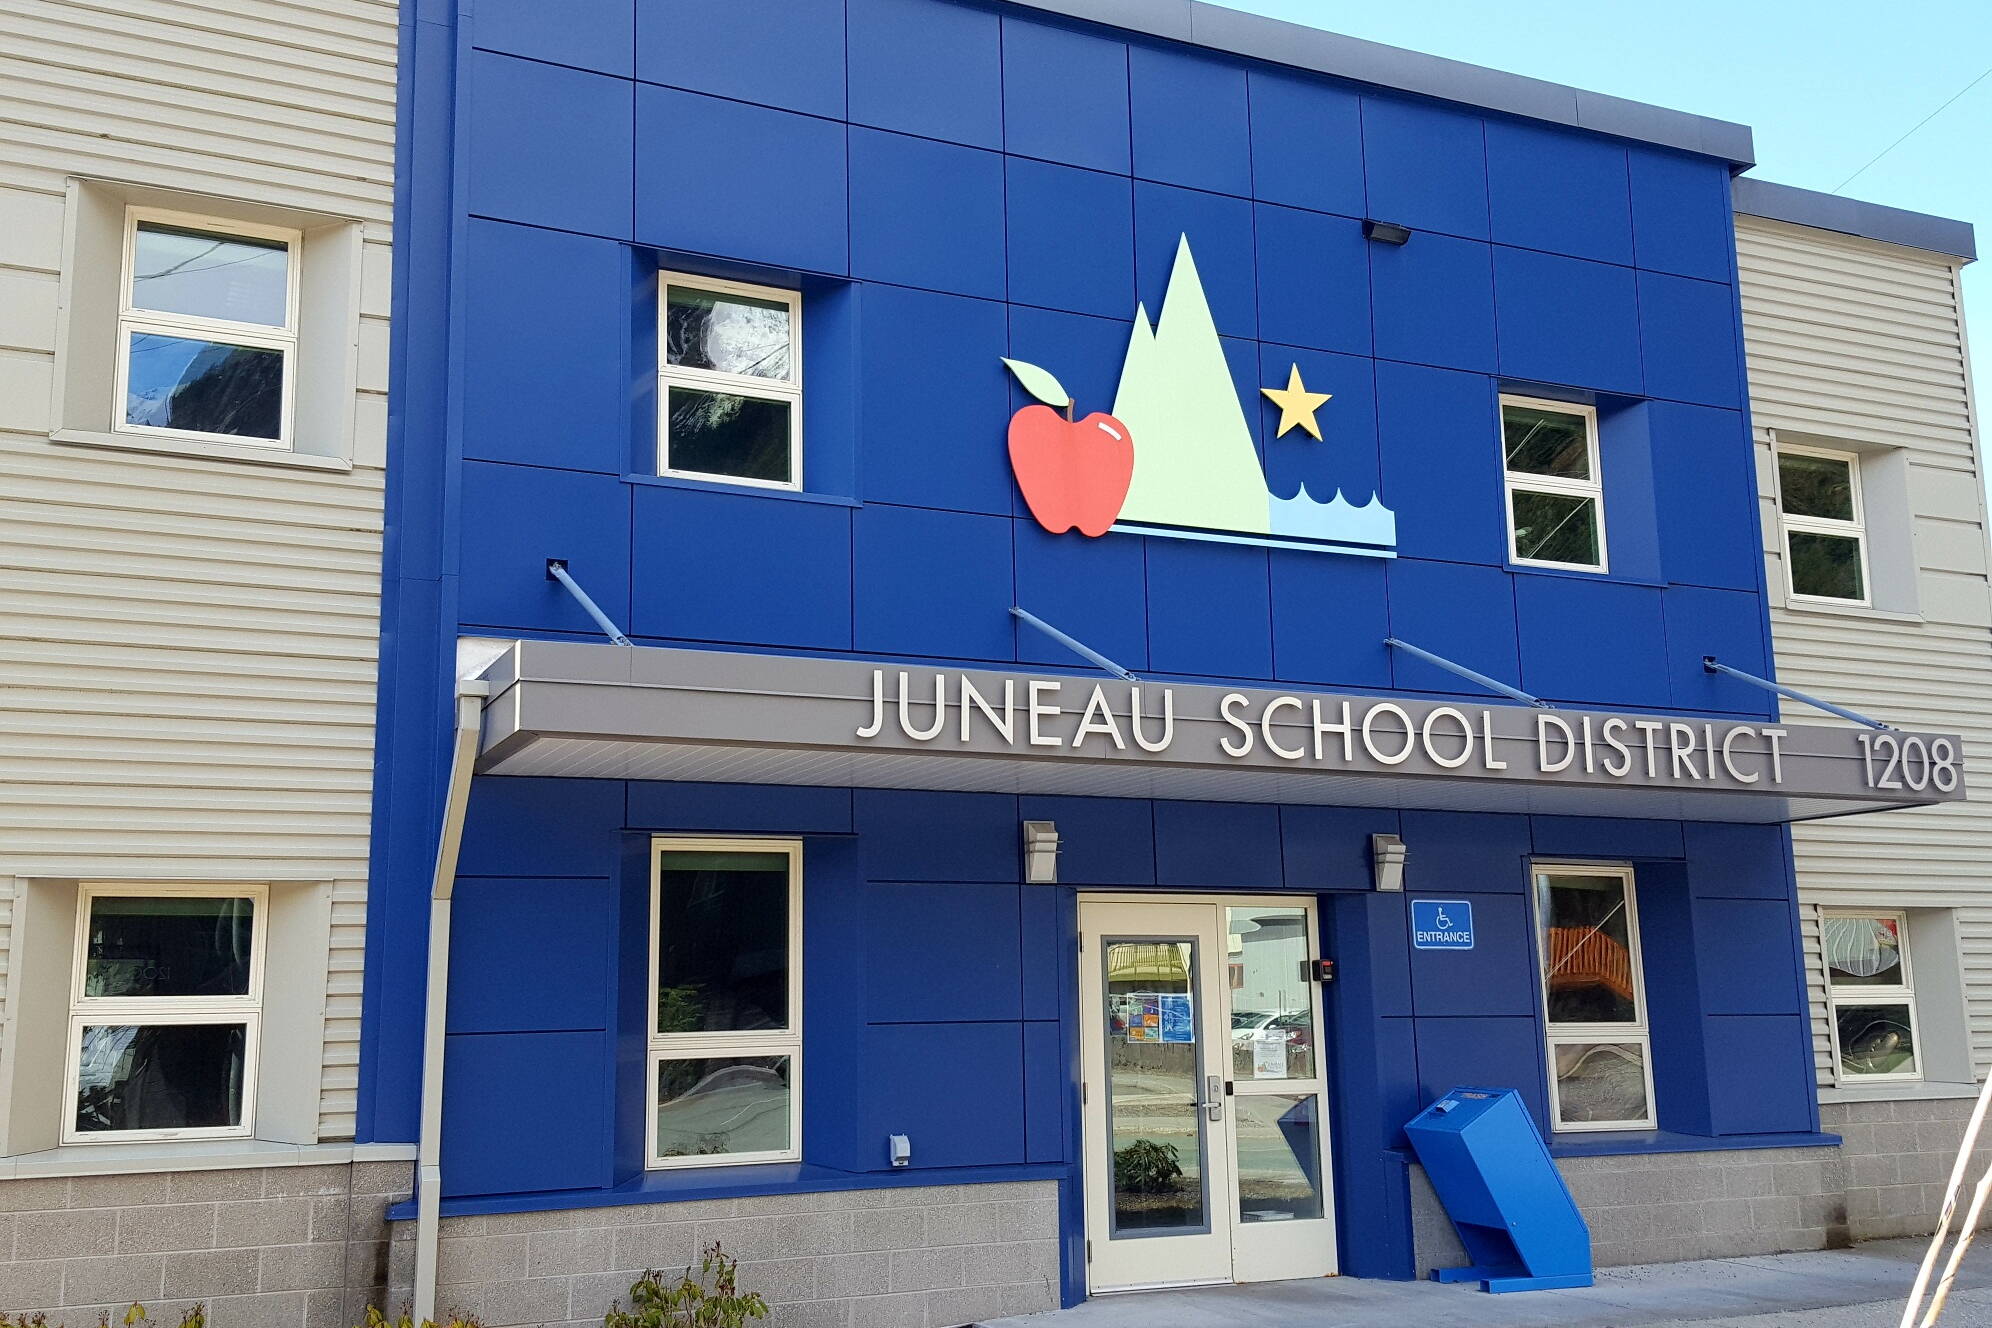 The Juneau School District administrative office, which would be closed and turned over to Juneau’s municipal government under a pending consolidation plan. (City and Borough of Juneau photo)